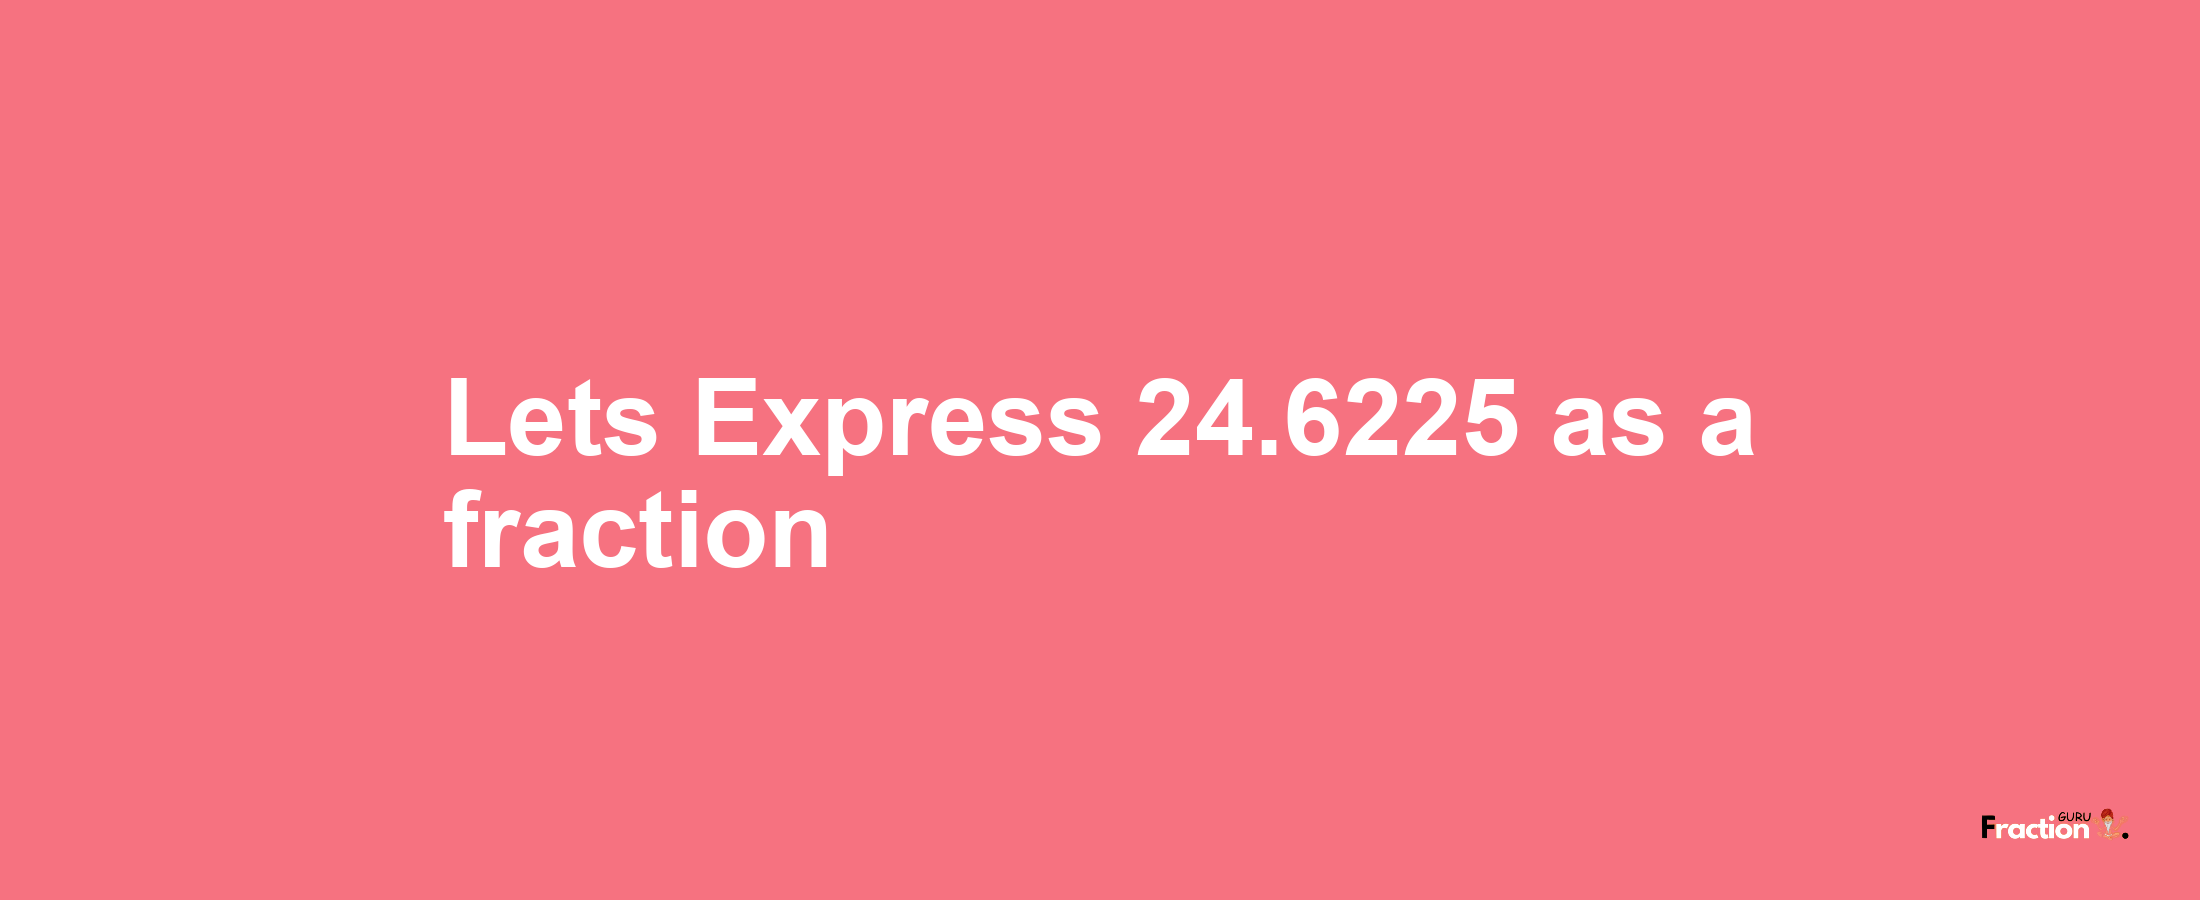 Lets Express 24.6225 as afraction